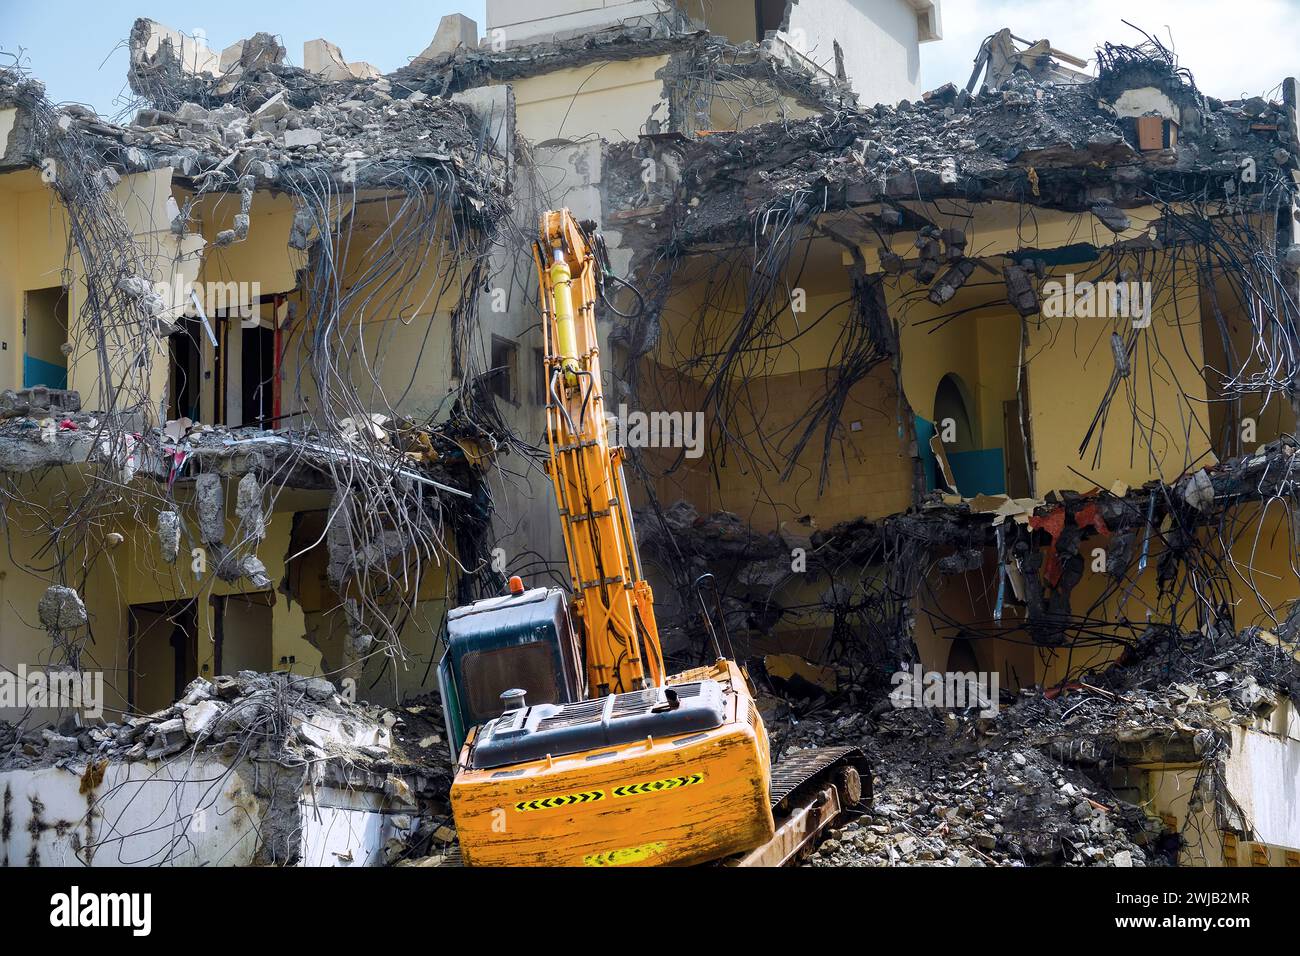 An special excavator destroys an old concrete house. Lots of twisted rebar sticking out, renovation programm Stock Photo